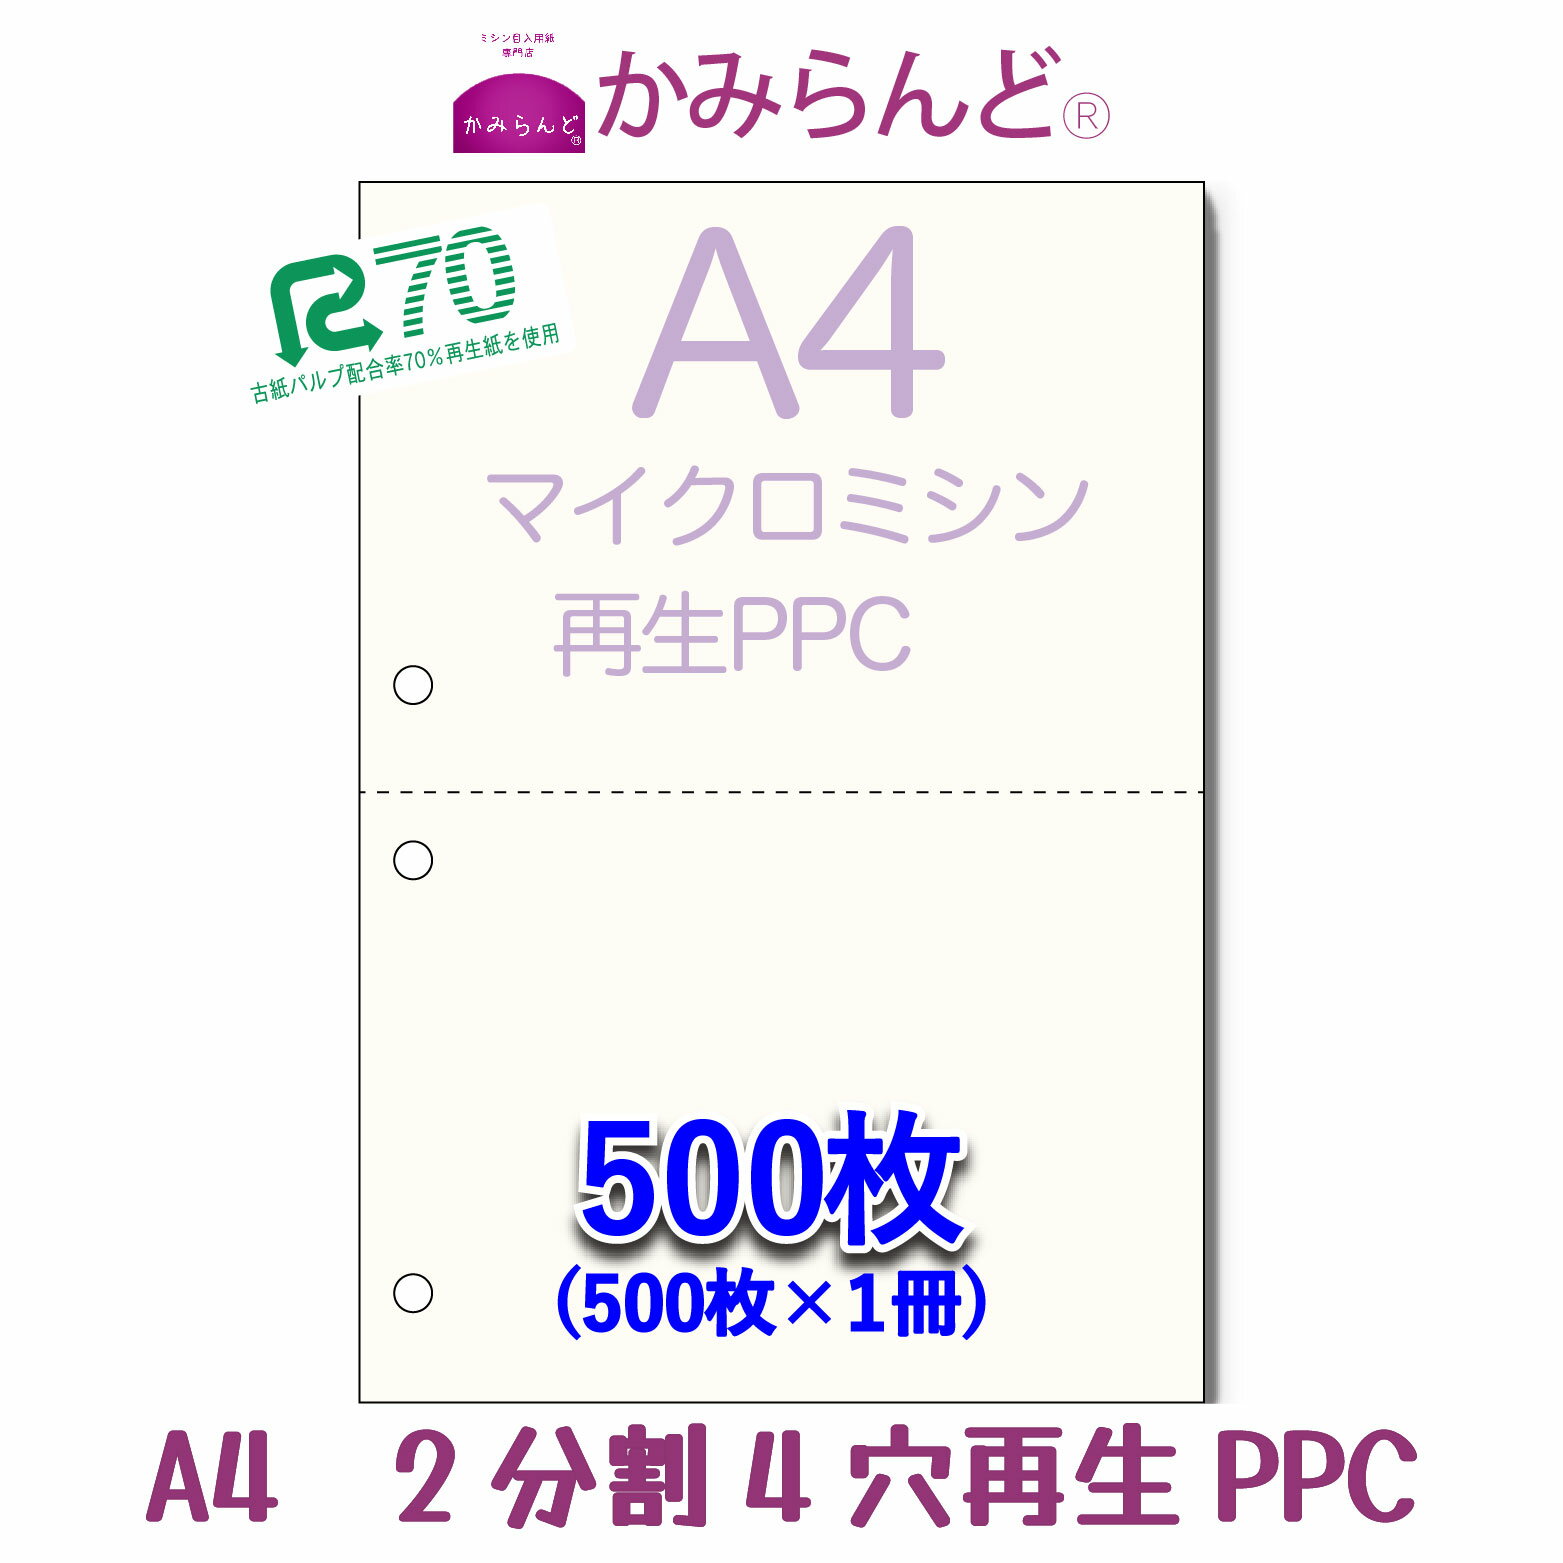 【A4】2分割 4穴マイクロミシン目入用紙500枚 PPC再生紙Recycle paper